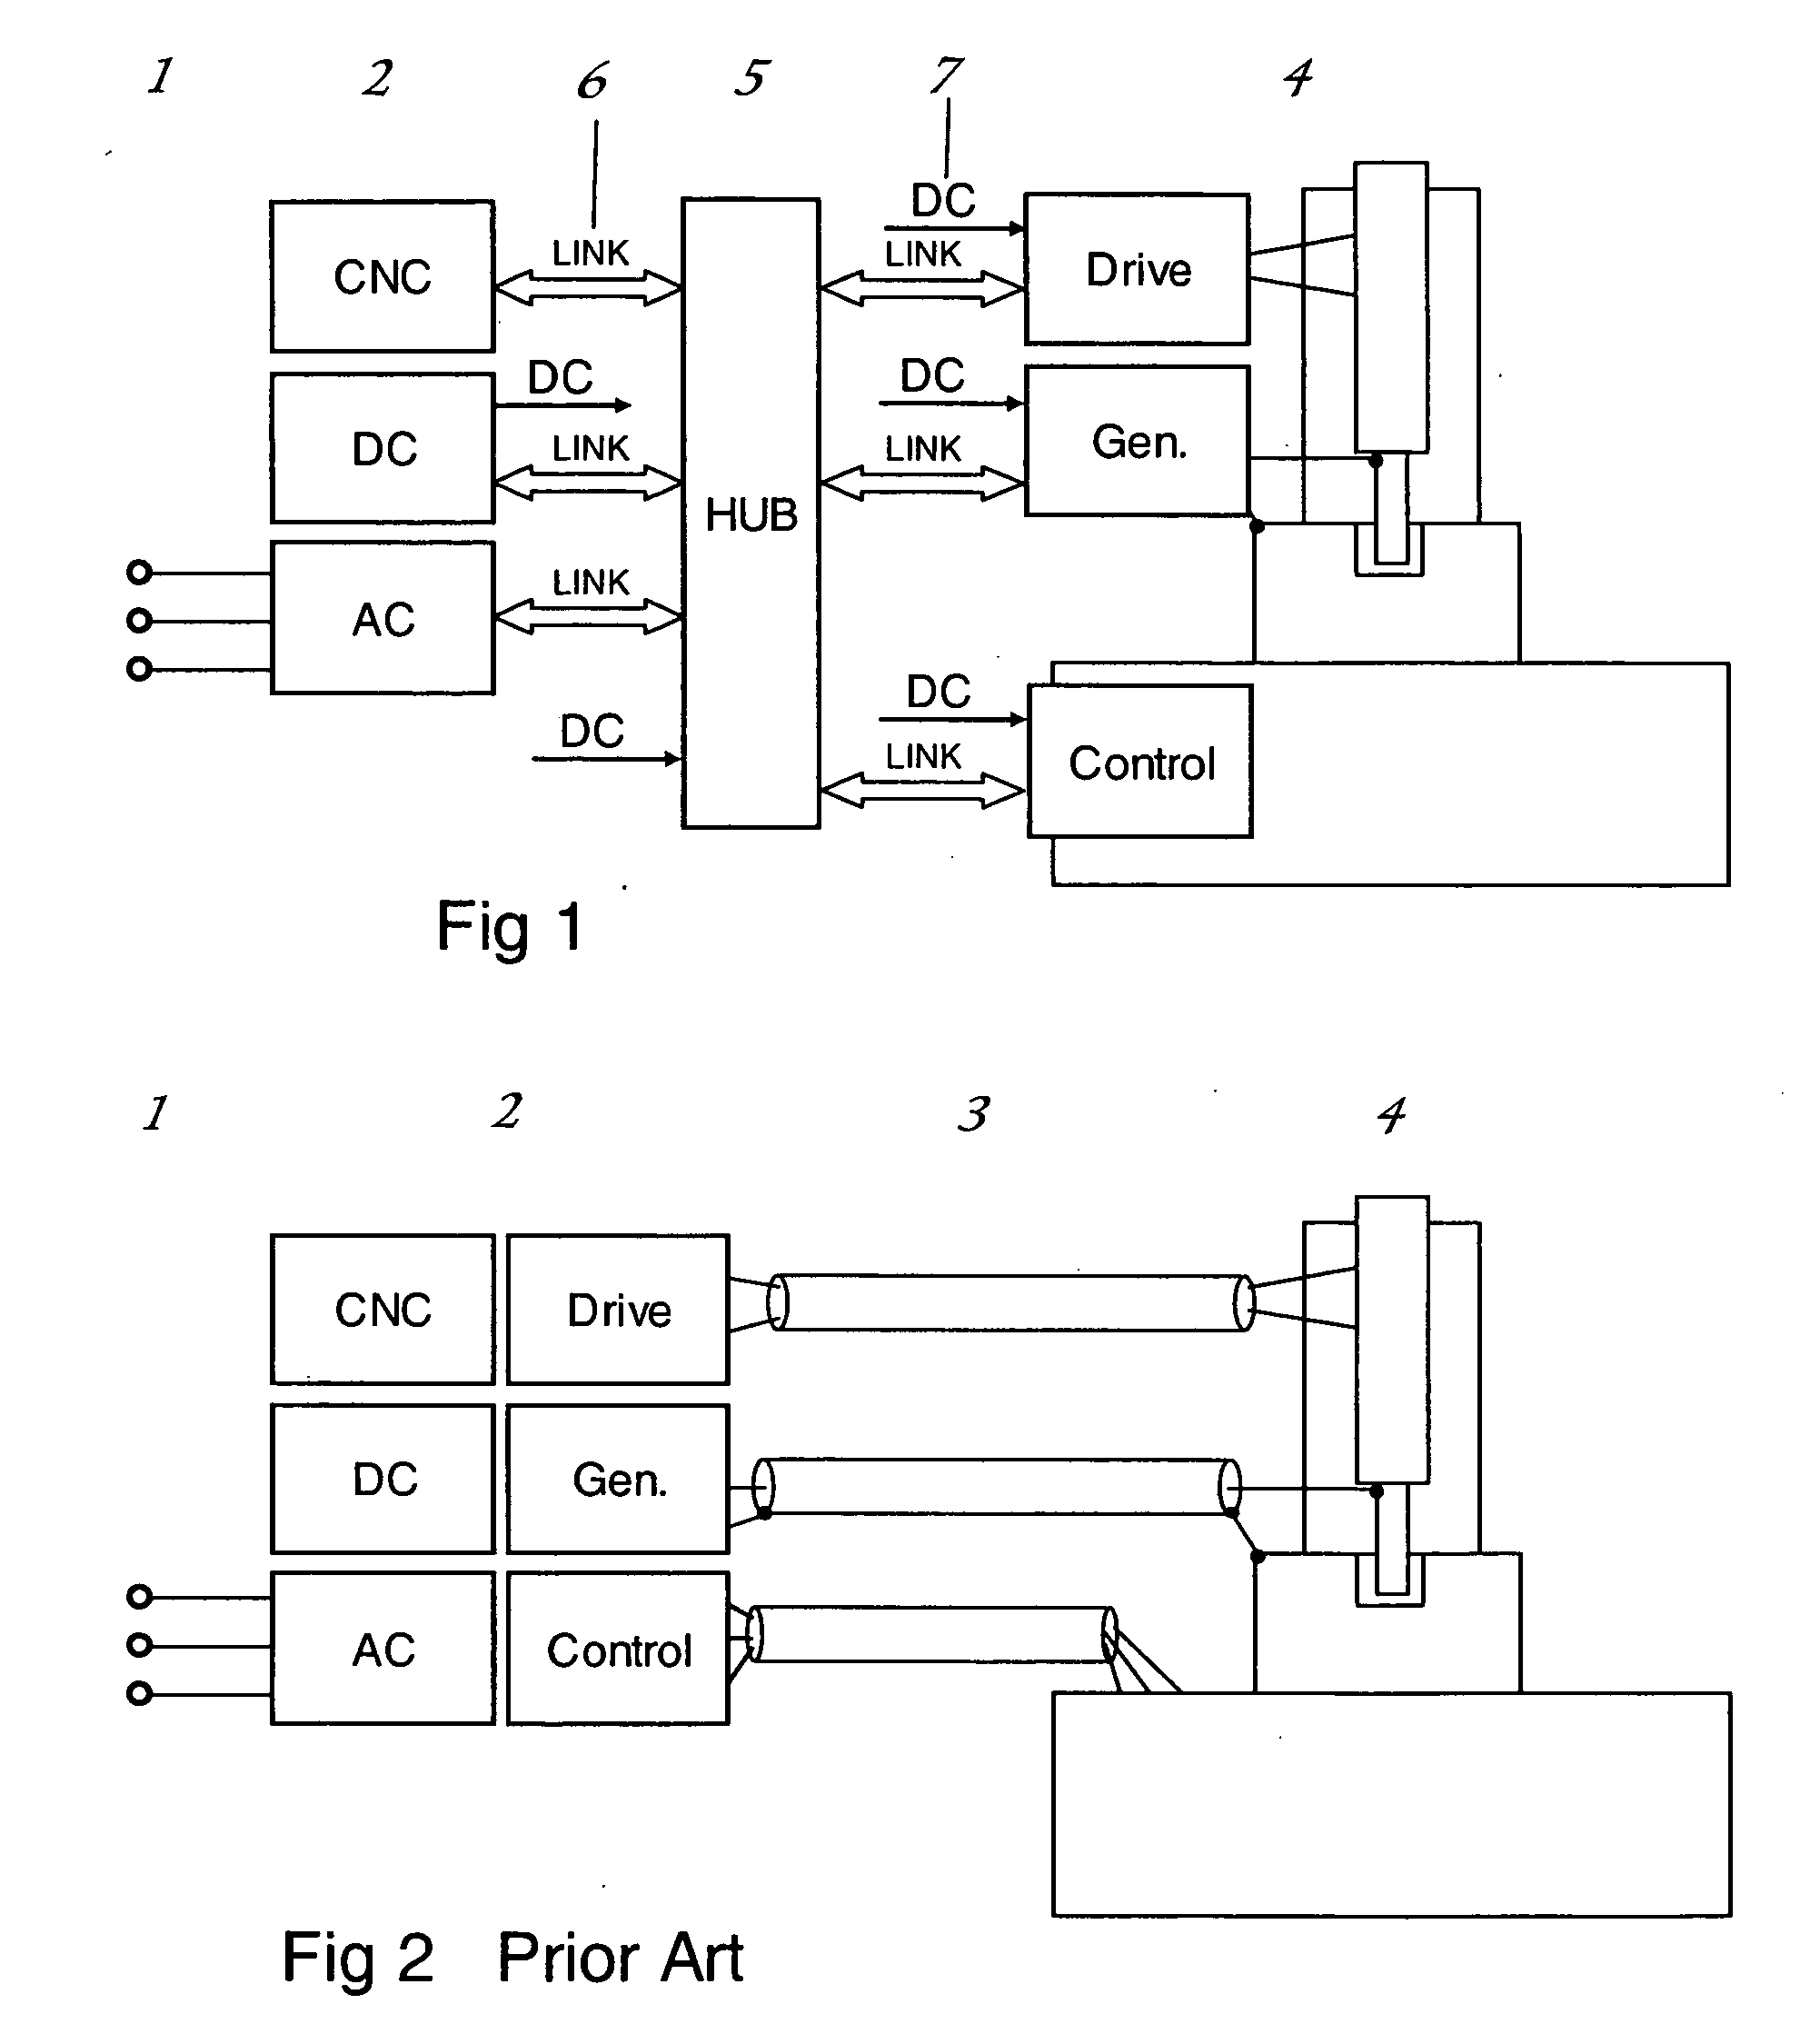 Method and generator for electrical discharge machining